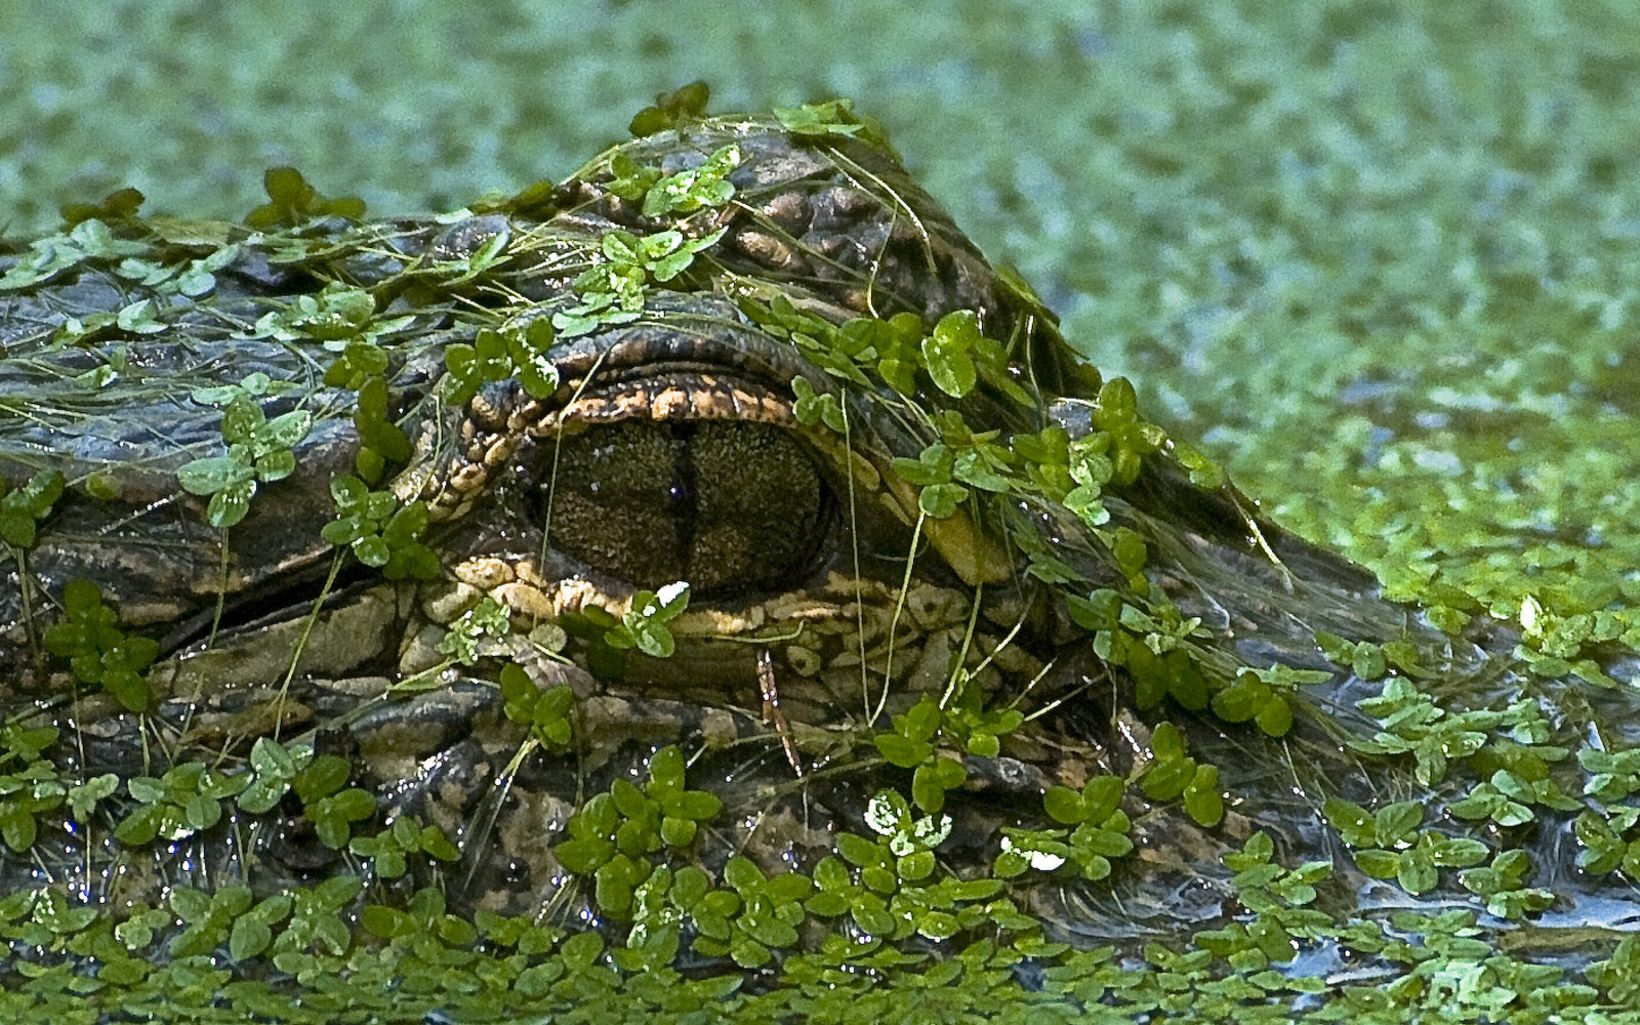 Well-camouflaged amongst a blanket of duckweed, an alligator's eyes rise just above the water's surface.